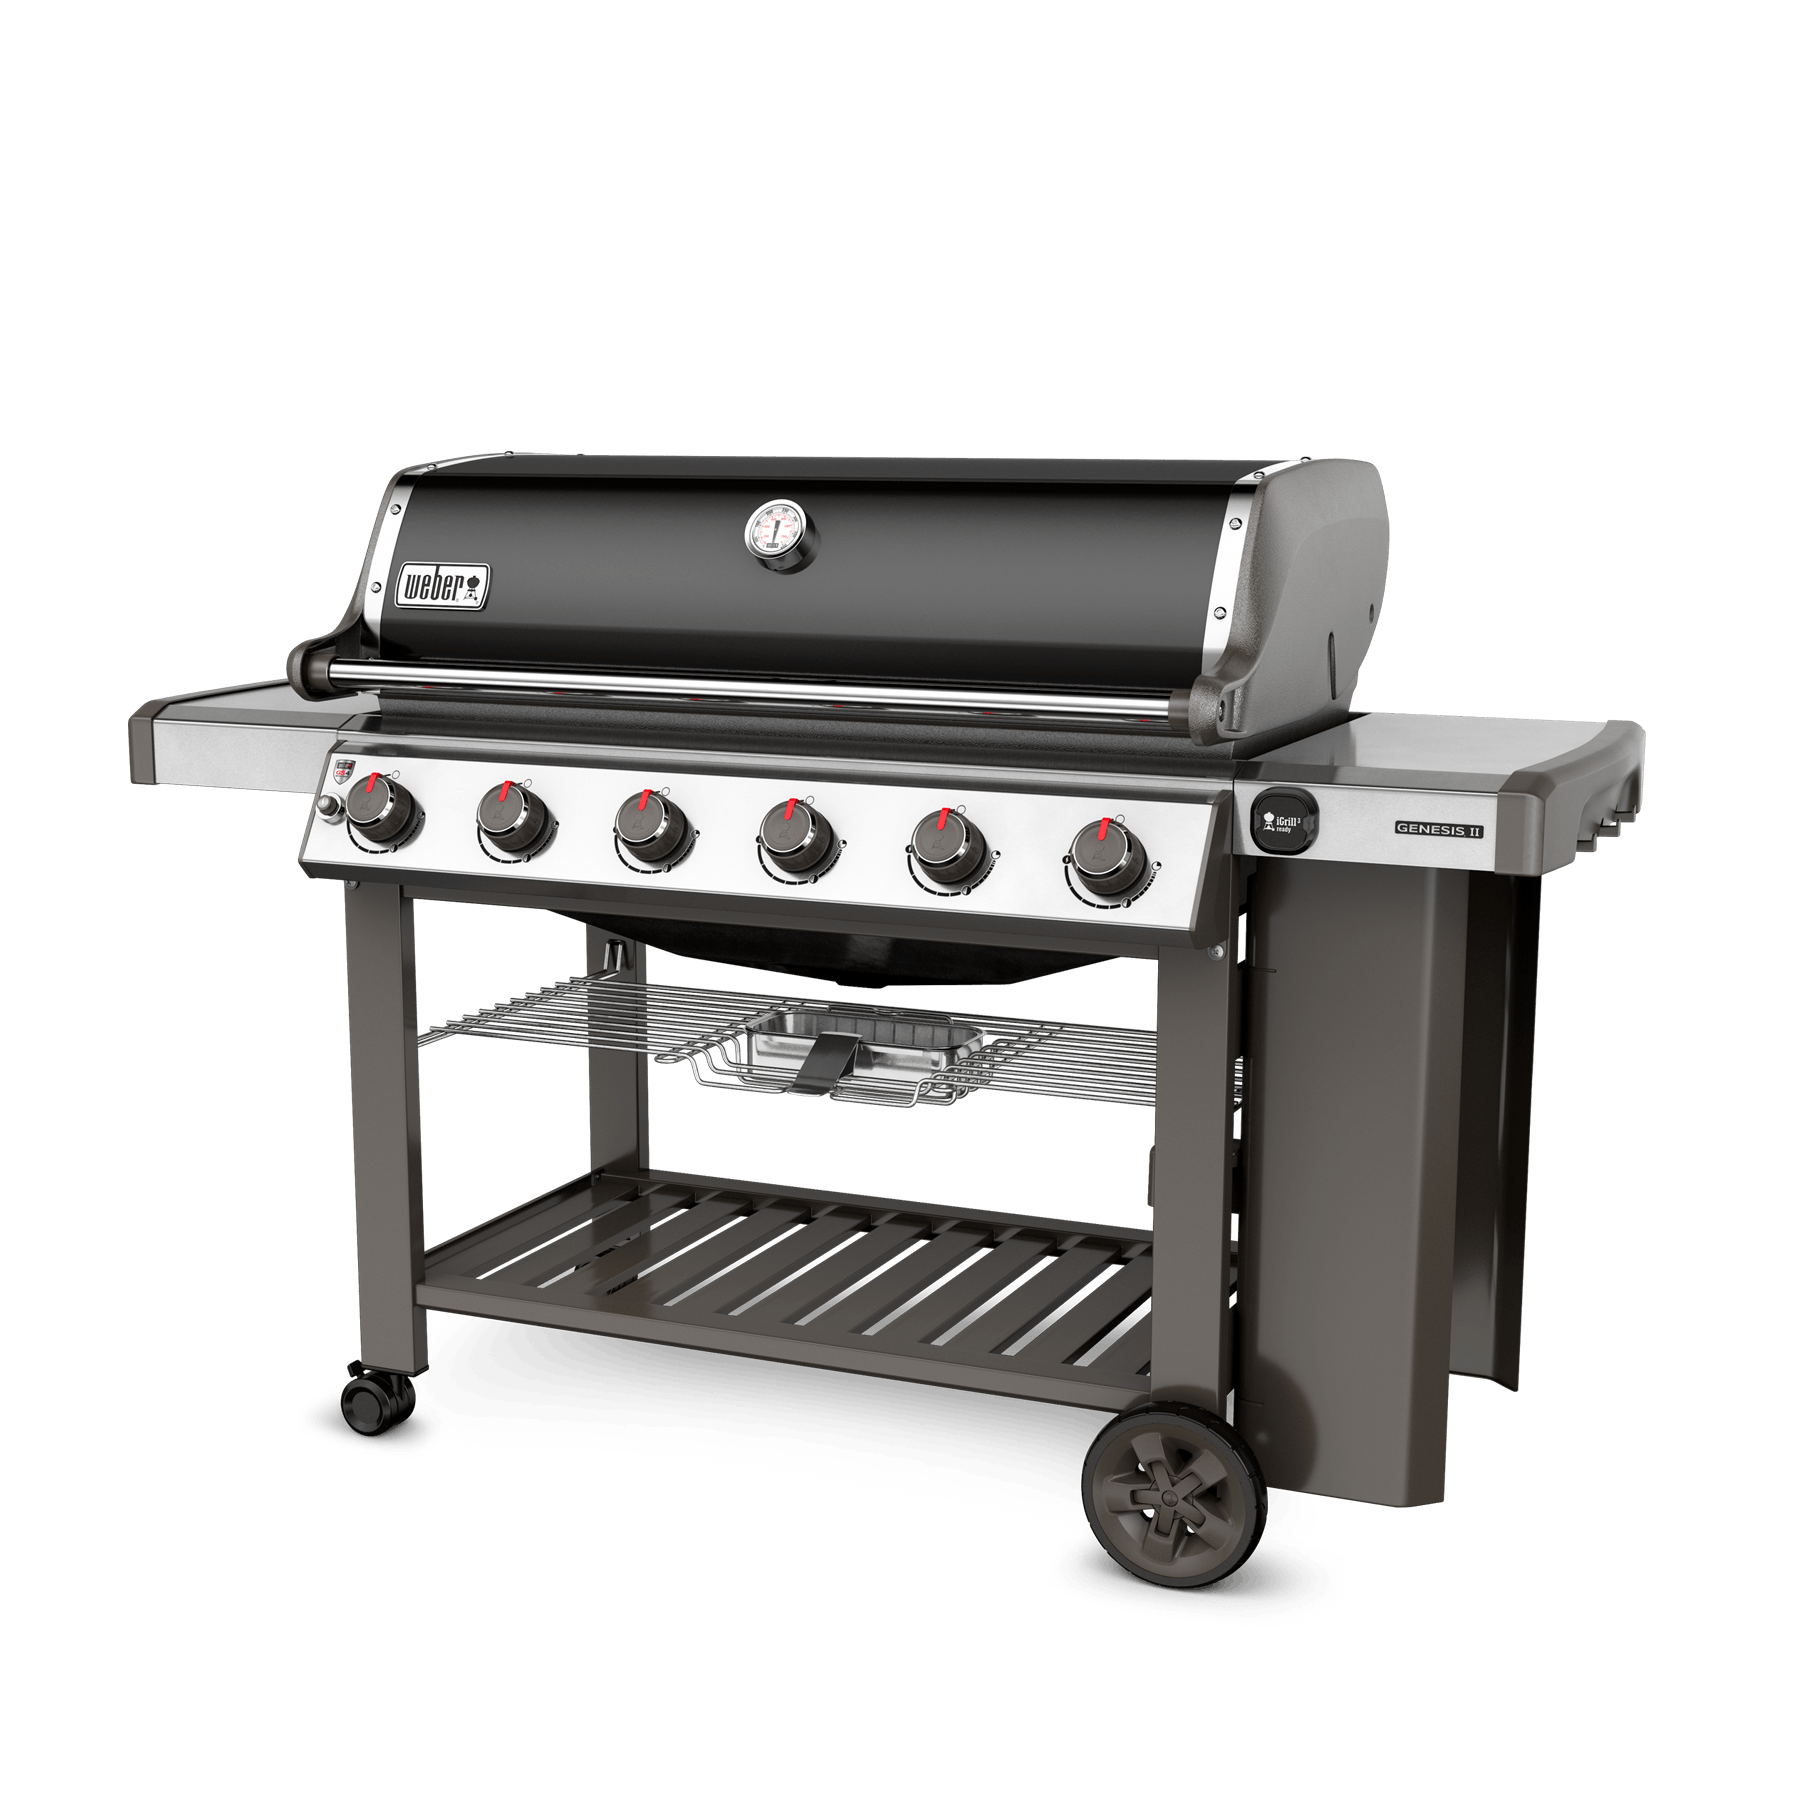 WEBER GENESIS II 610 NG NATURAL GAS or LPG PROPANE GRILL ORIFICES S-610 or E-610 